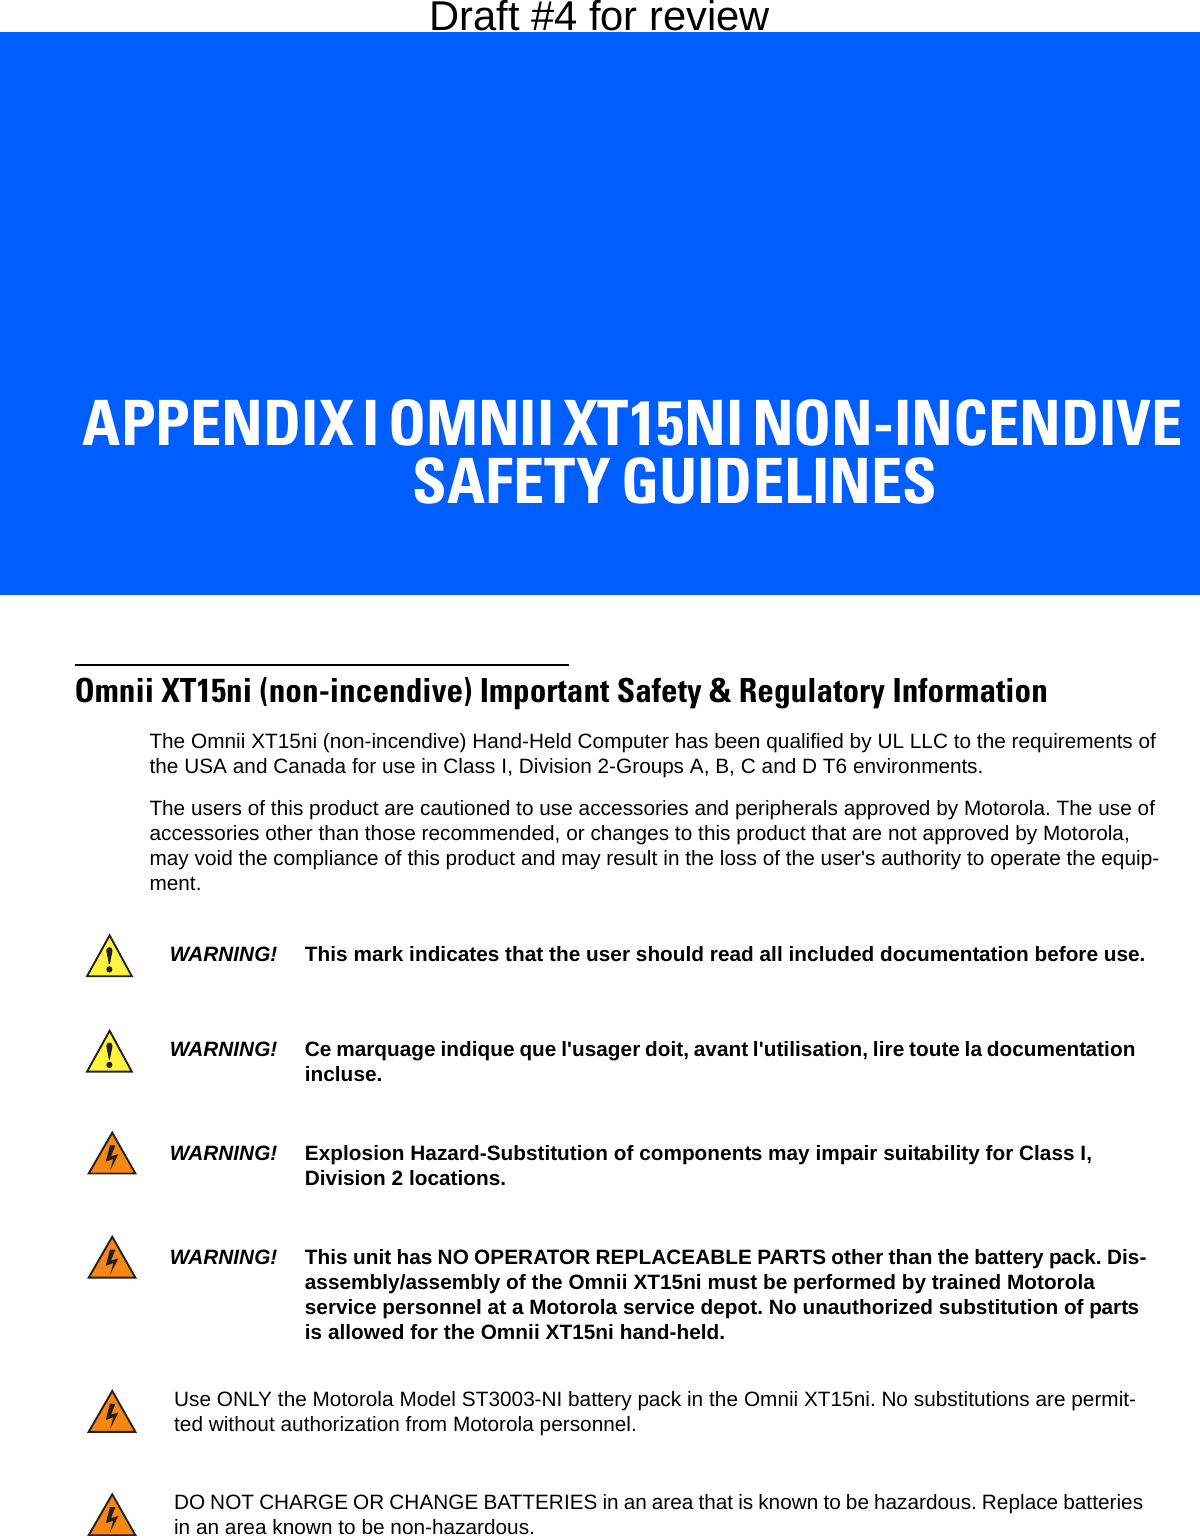 APPENDIX I OMNII XT15NI NON-INCENDIVE SAFETY GUIDELINESIOmnii XT15ni Non-Incendive Safety GuidelinesOmnii XT15ni (non-incendive) Important Safety &amp; Regulatory InformationThe Omnii XT15ni (non-incendive) Hand-Held Computer has been qualified by UL LLC to the requirements of the USA and Canada for use in Class I, Division 2-Groups A, B, C and D T6 environments.The users of this product are cautioned to use accessories and peripherals approved by Motorola. The use of accessories other than those recommended, or changes to this product that are not approved by Motorola, may void the compliance of this product and may result in the loss of the user&apos;s authority to operate the equip-ment.WARNING! This mark indicates that the user should read all included documentation before use.WARNING! Ce marquage indique que l&apos;usager doit, avant l&apos;utilisation, lire toute la documentation incluse.WARNING! Explosion Hazard-Substitution of components may impair suitability for Class I, Division 2 locations.WARNING! This unit has NO OPERATOR REPLACEABLE PARTS other than the battery pack. Dis-assembly/assembly of the Omnii XT15ni must be performed by trained Motorola service personnel at a Motorola service depot. No unauthorized substitution of parts is allowed for the Omnii XT15ni hand-held.Use ONLY the Motorola Model ST3003-NI battery pack in the Omnii XT15ni. No substitutions are permit-ted without authorization from Motorola personnel.DO NOT CHARGE OR CHANGE BATTERIES in an area that is known to be hazardous. Replace batteries in an area known to be non-hazardous.Draft #4 for review